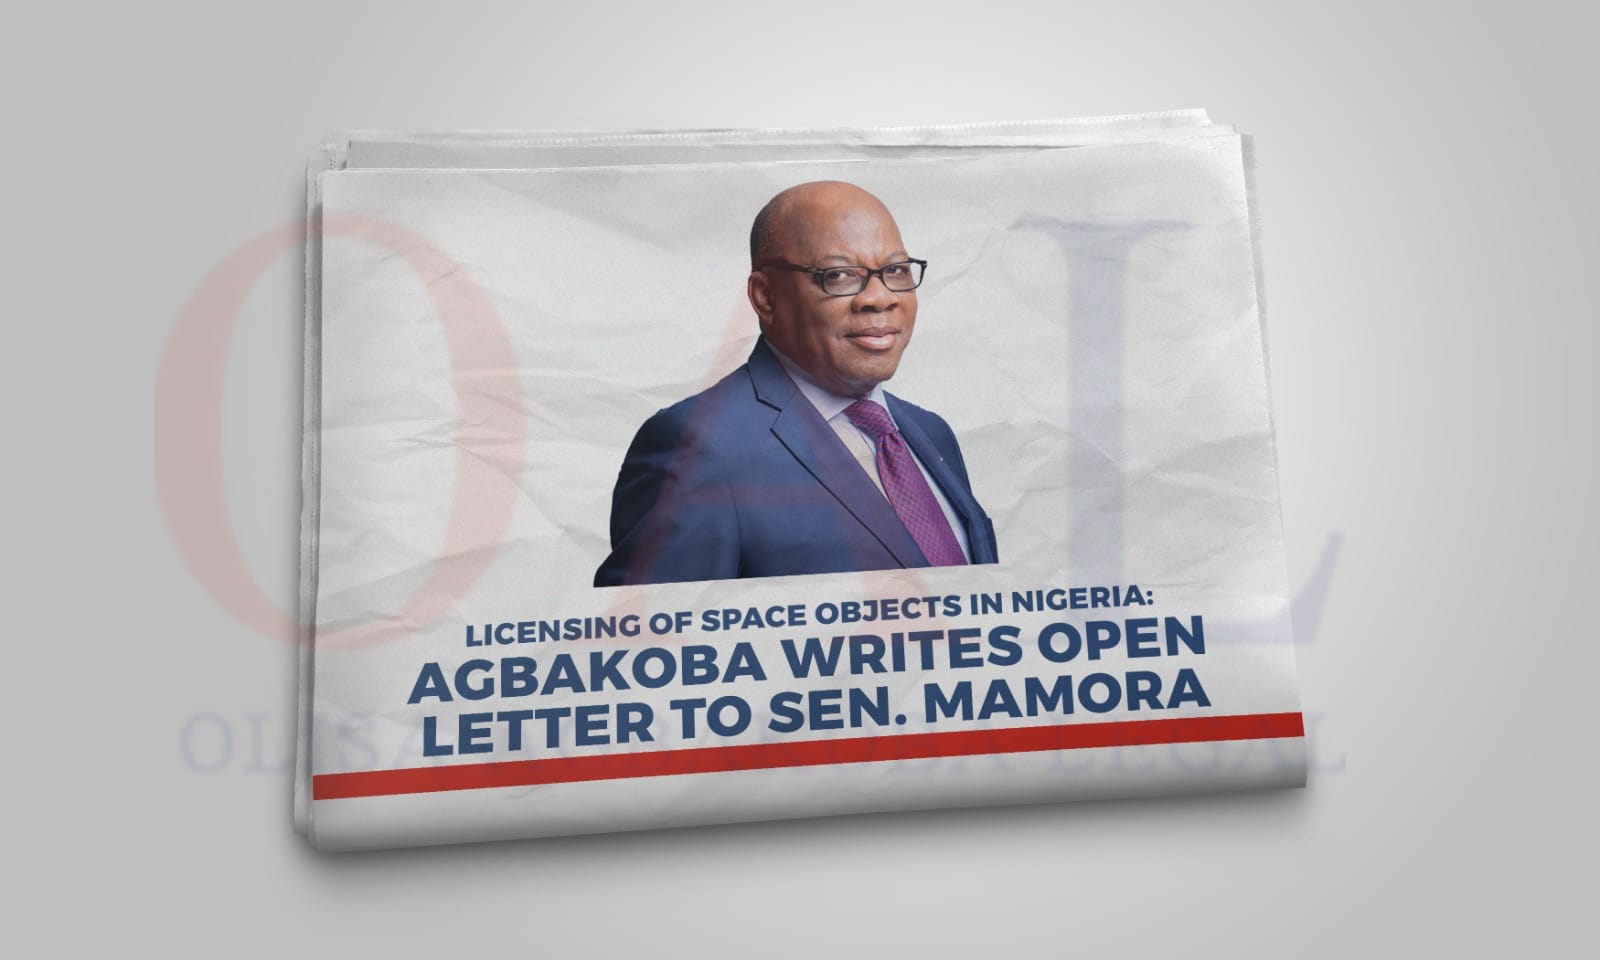 Licensing of Space Objects in Nigeria. Dr Olisa Agbakoba Writes Open Letter to Senator Mamora